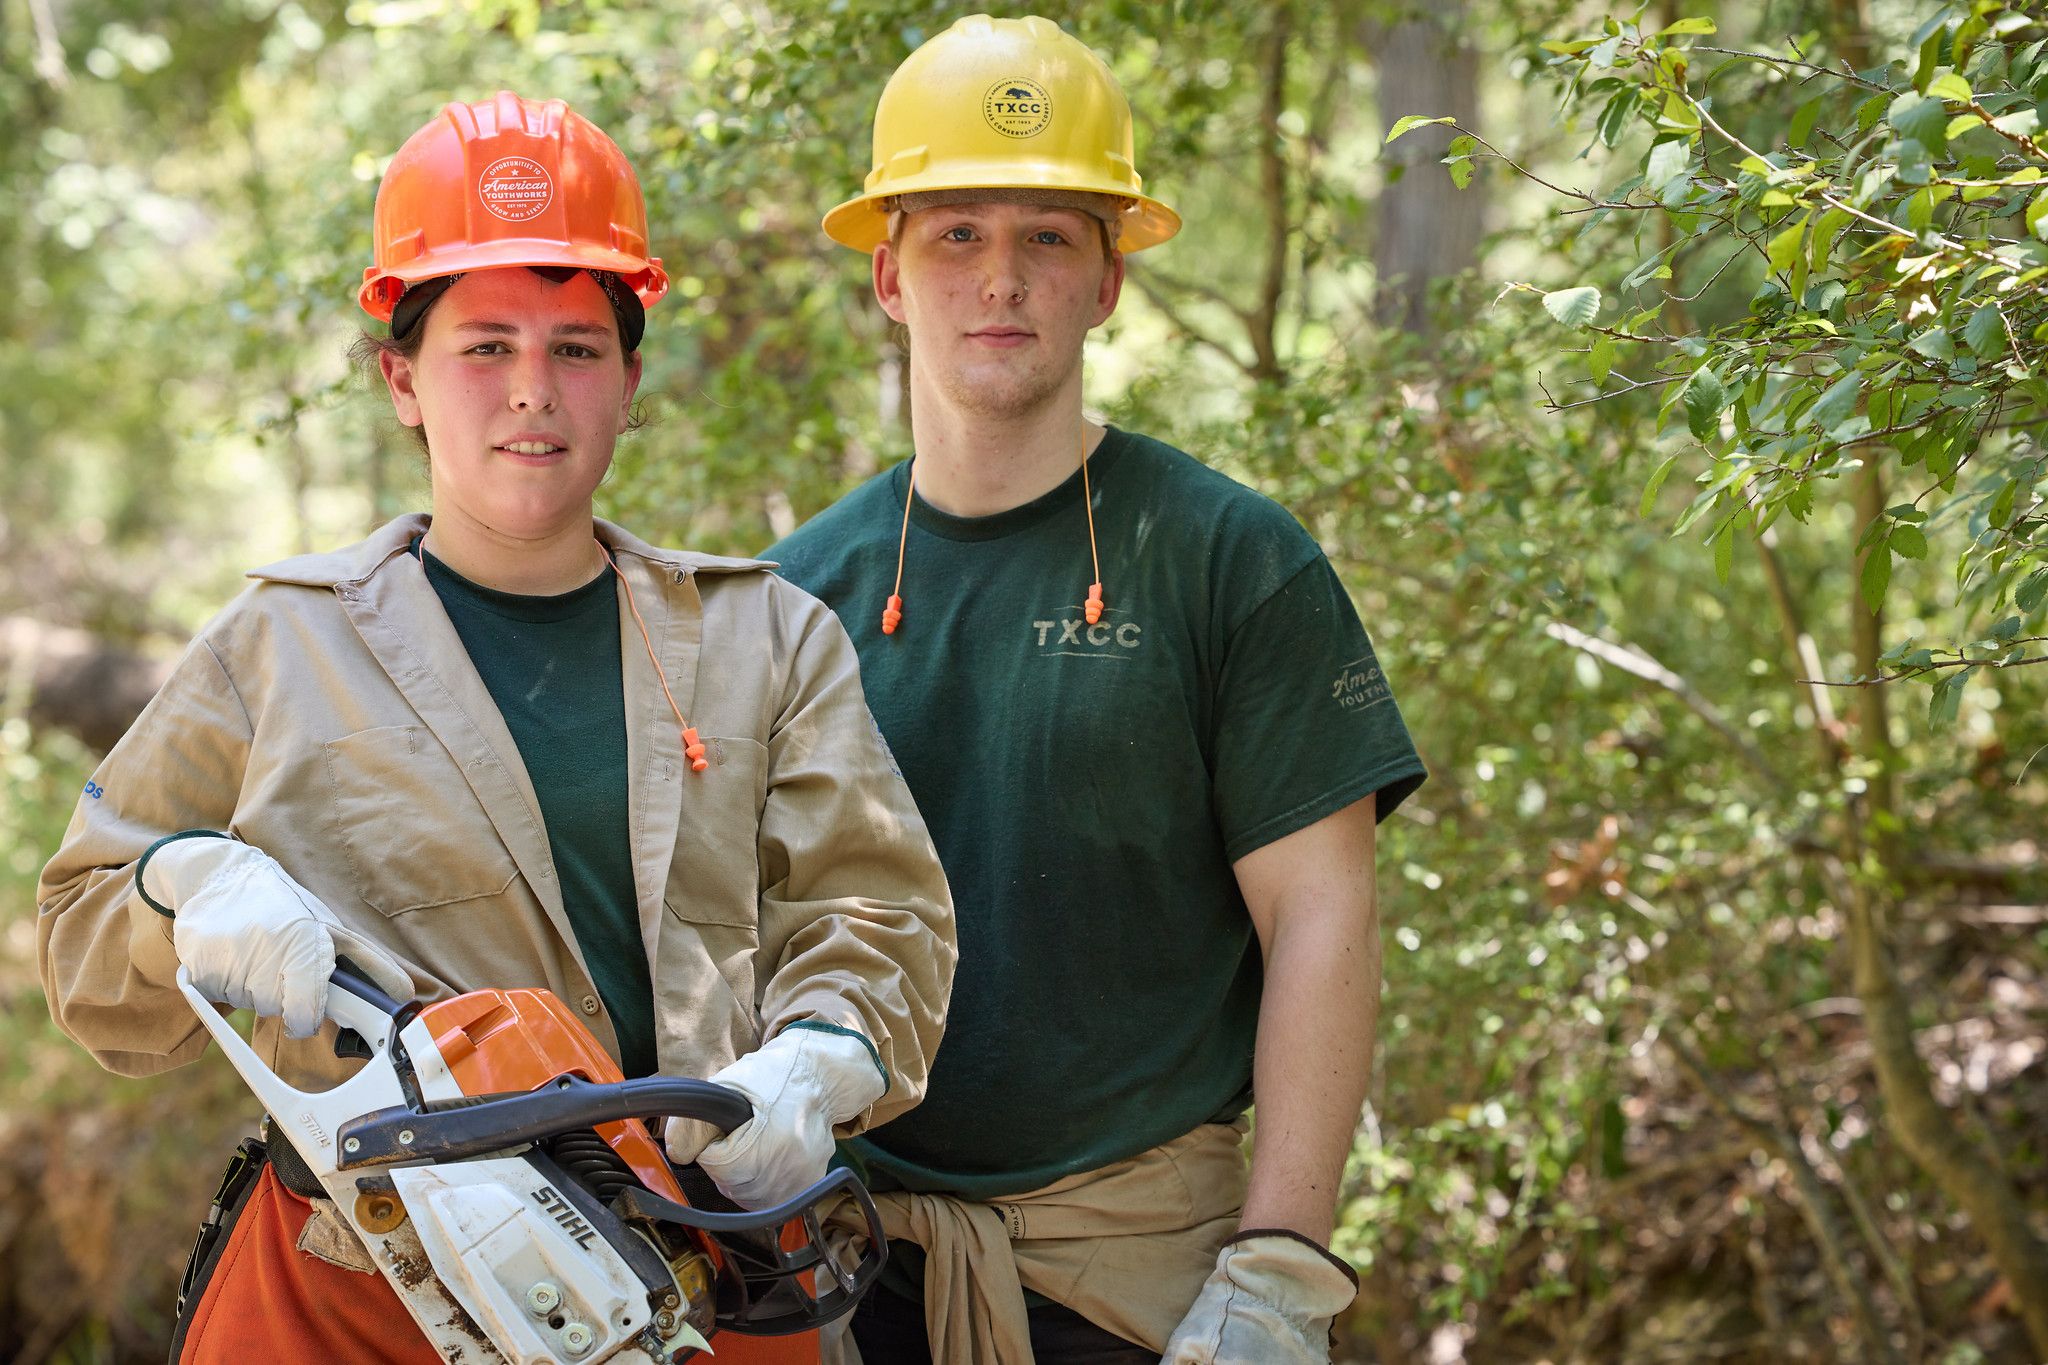 Two Americorps members pose in safety gear in a wooded outdoor environment.